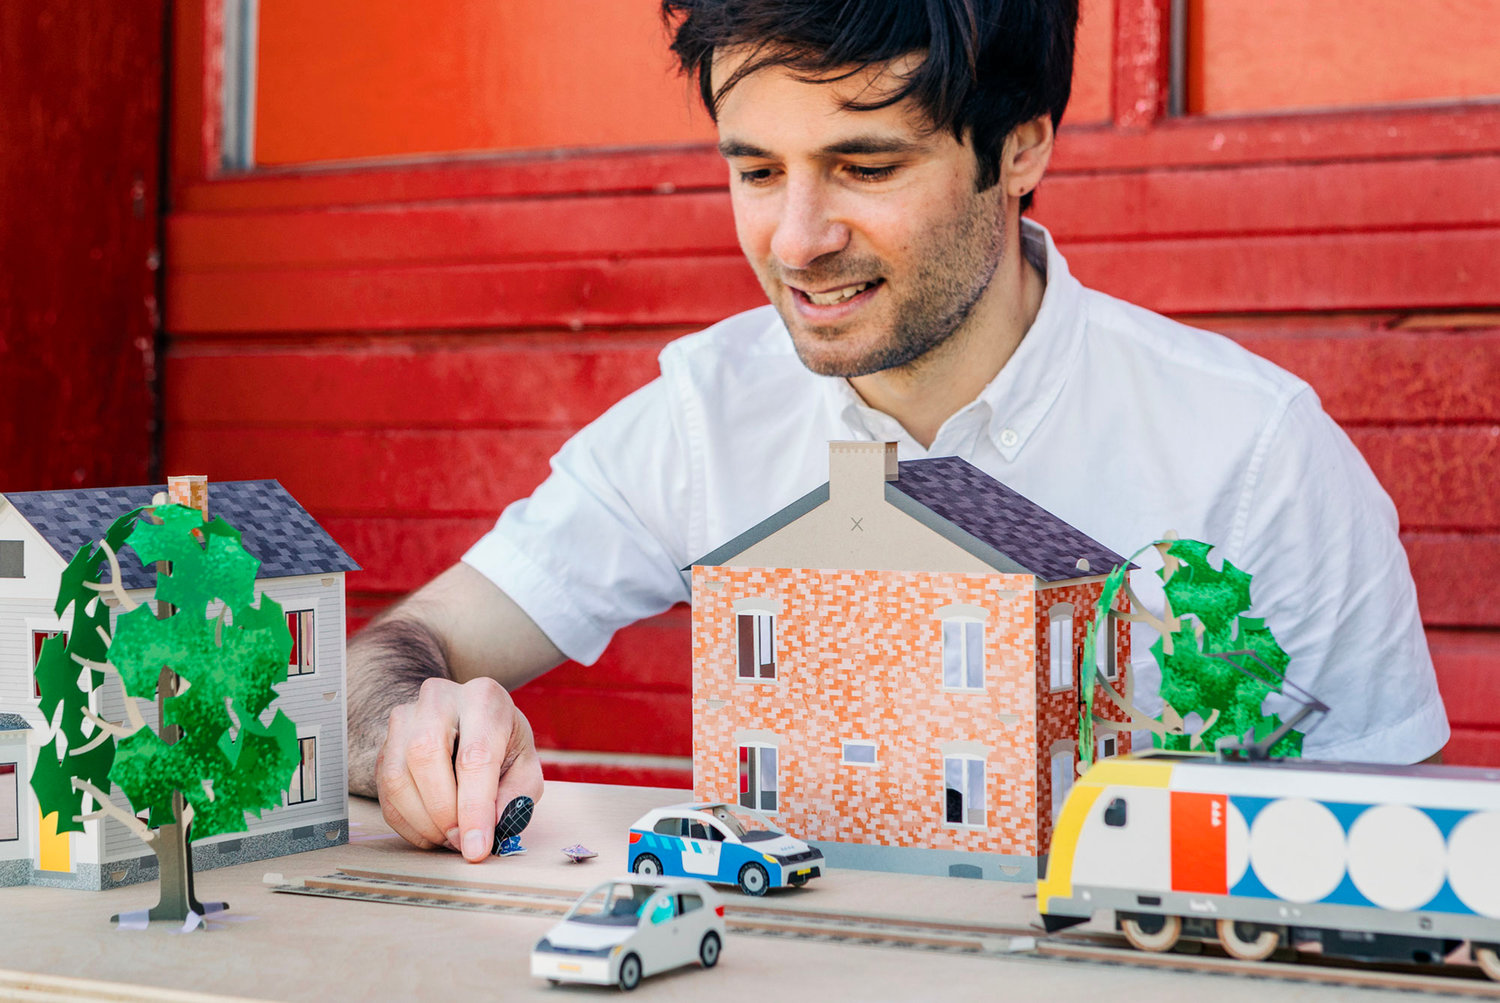 ‘20 Design Catalyist grant recipient Anther Kiely shown with his Cardkits